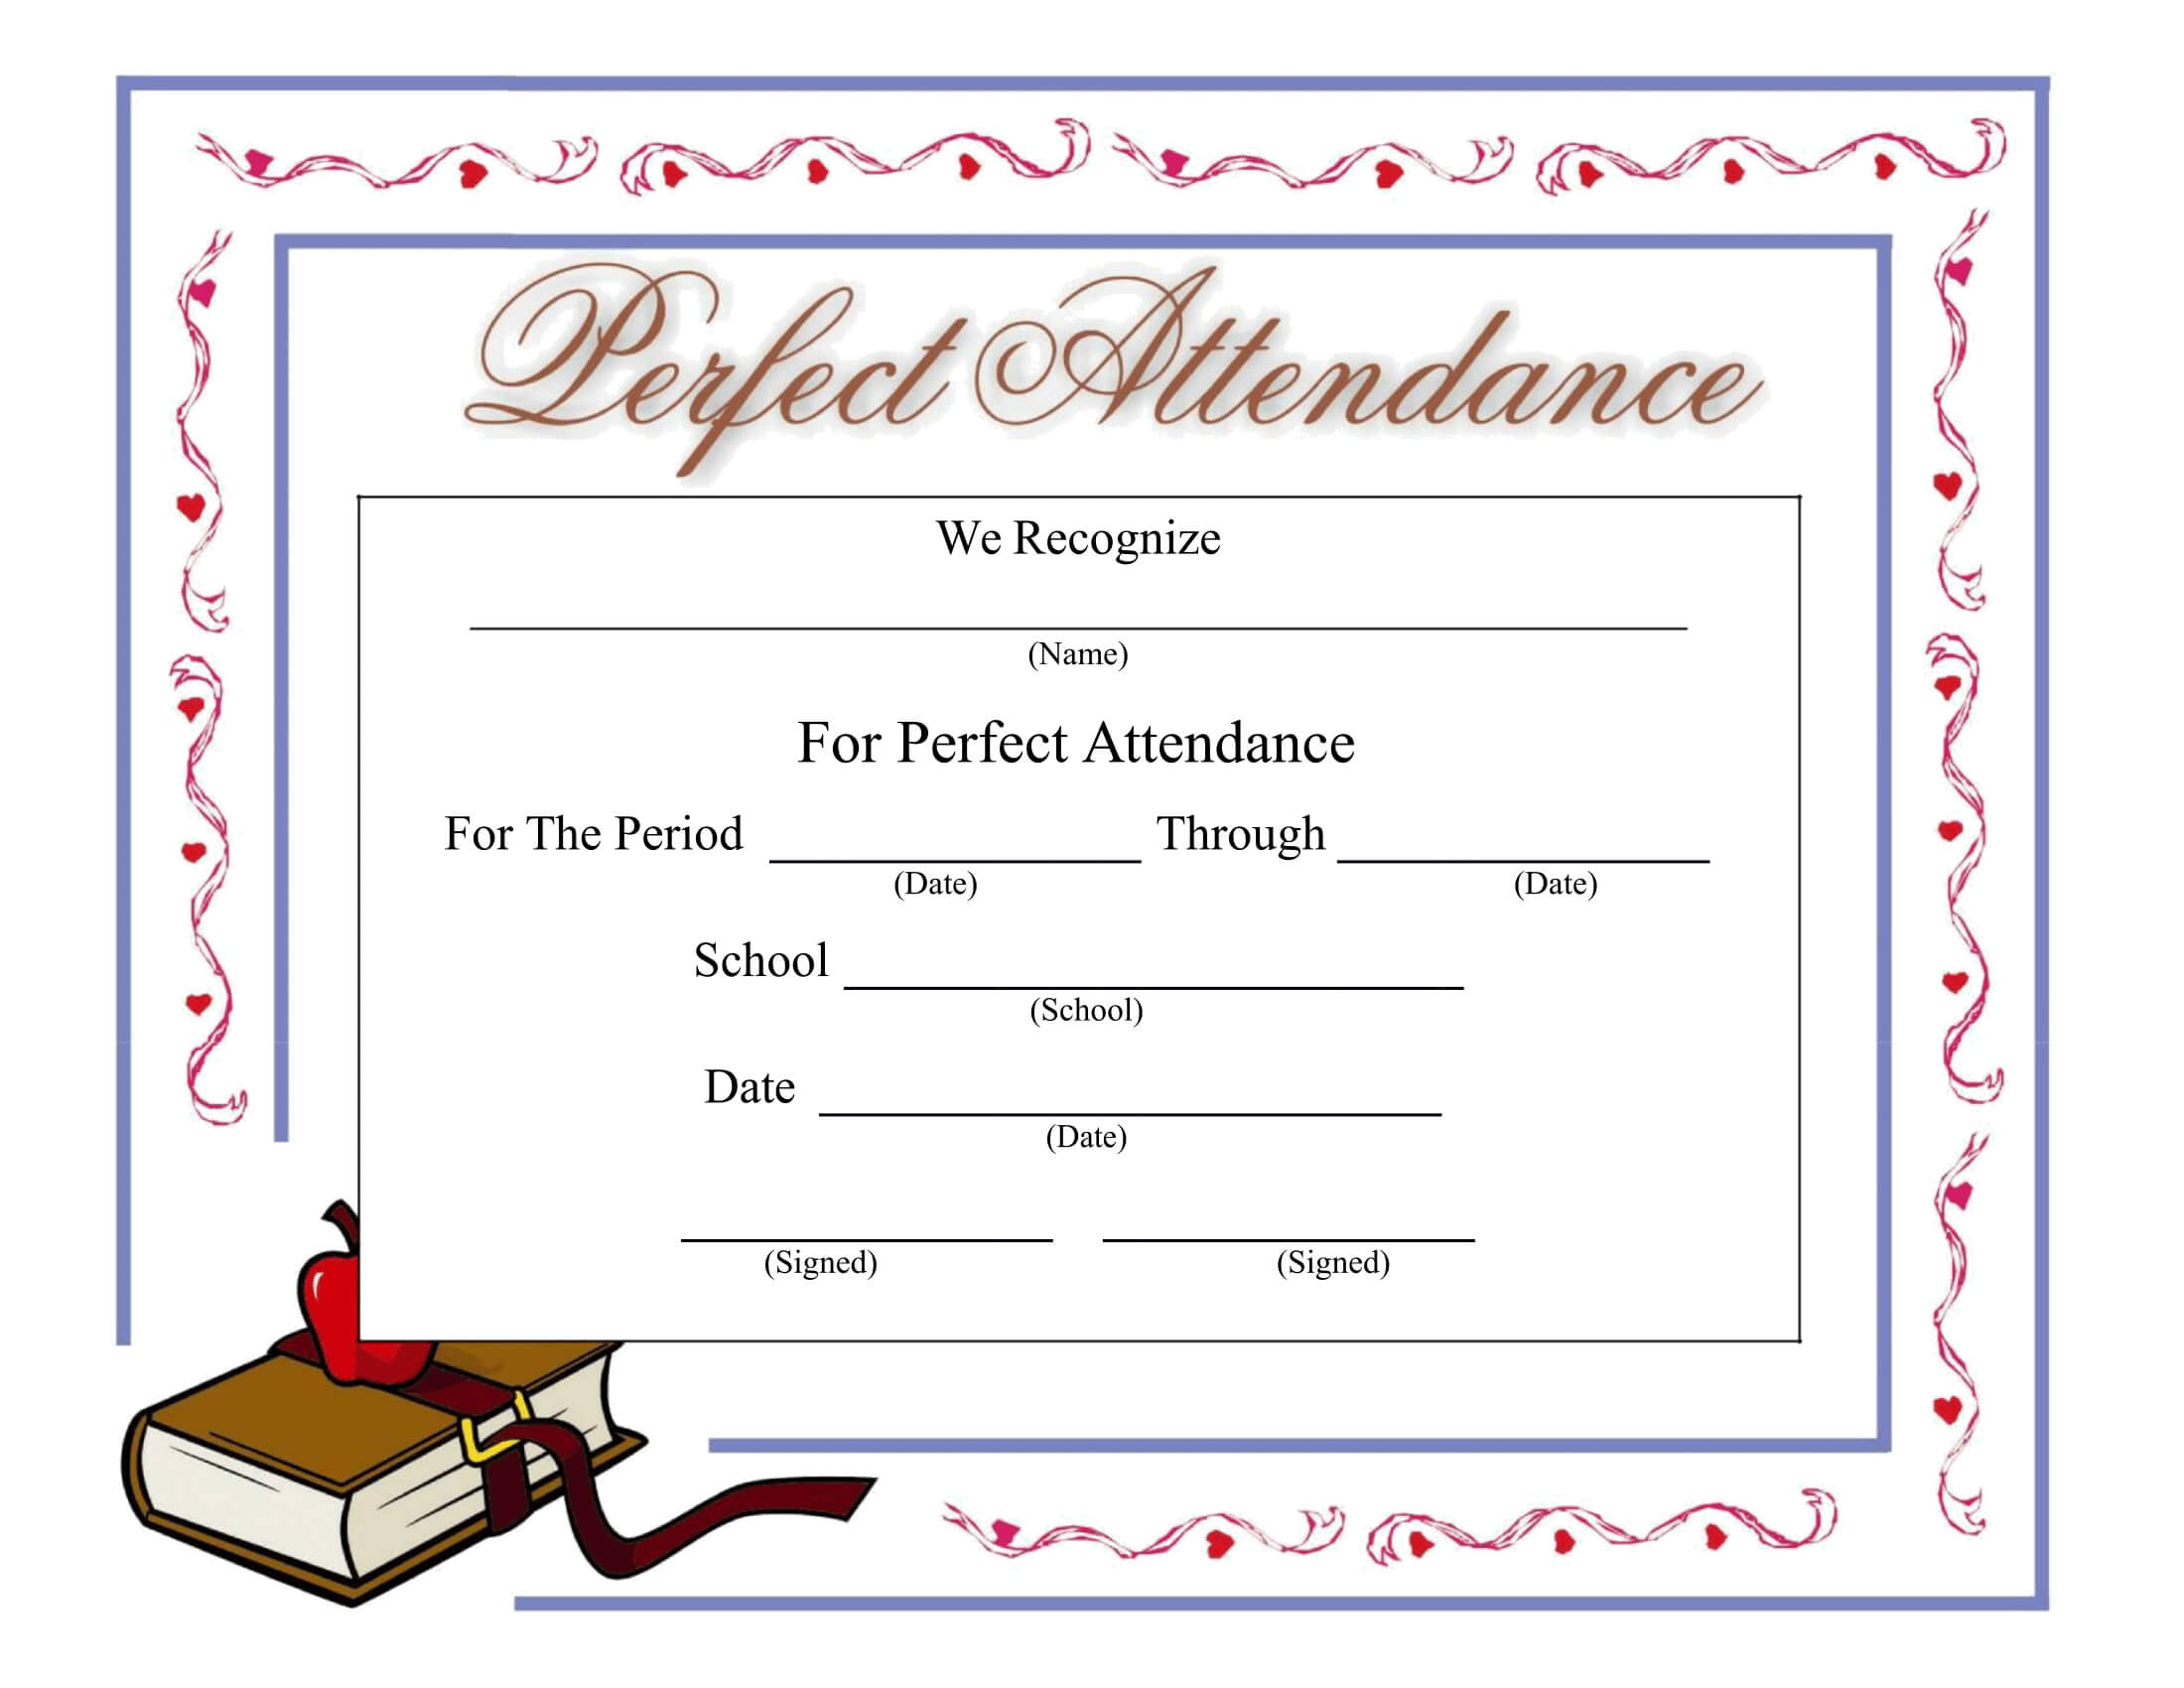 Perfect Attendance Certificate - Download A Free Template Pertaining To Perfect Attendance Certificate Free Template